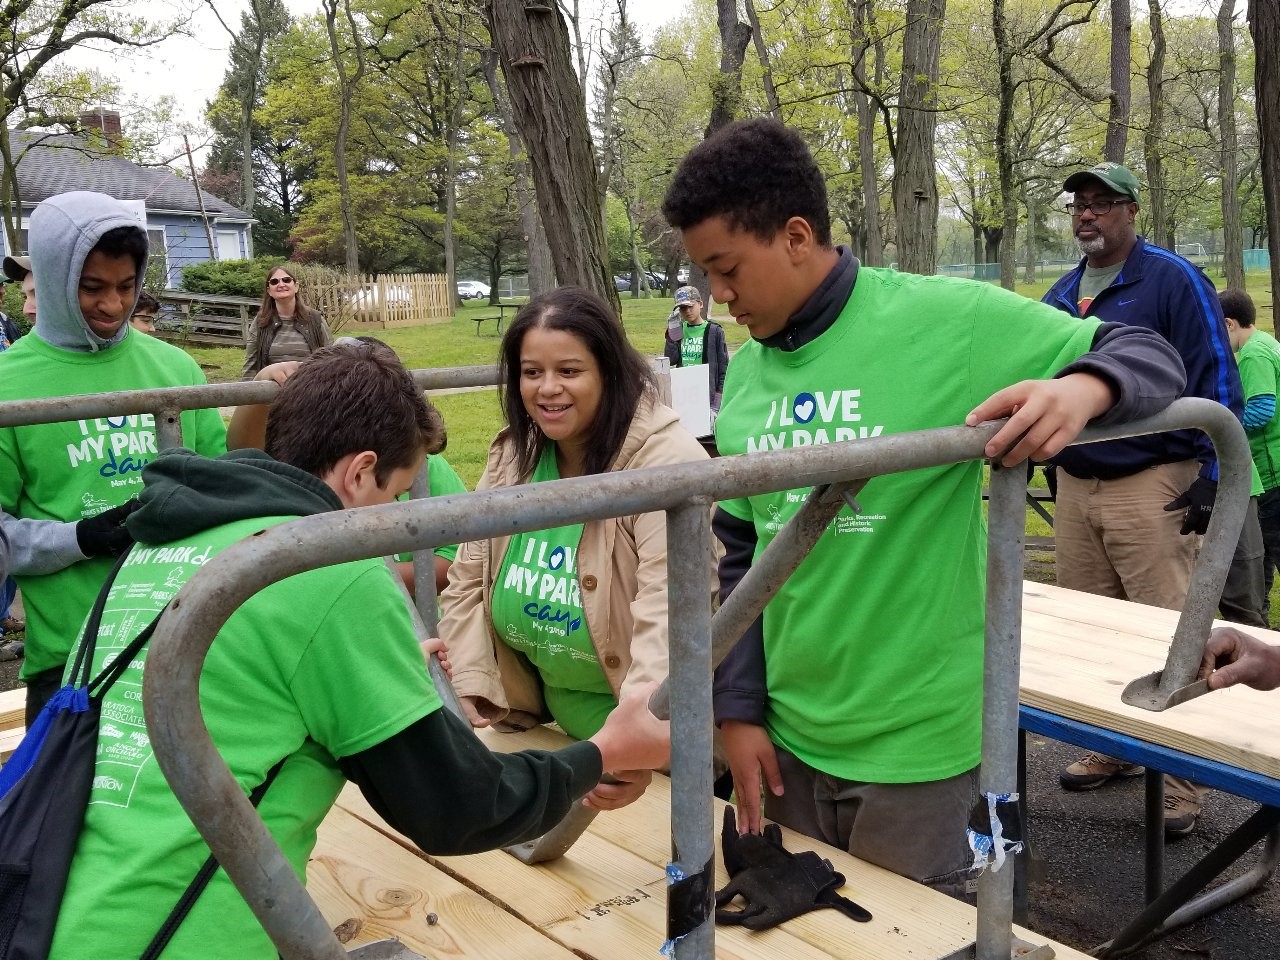 Constituents work with Assemblywoman Solages to build picnic tables at the Valley Stream State Park on I Love My Parks Day.